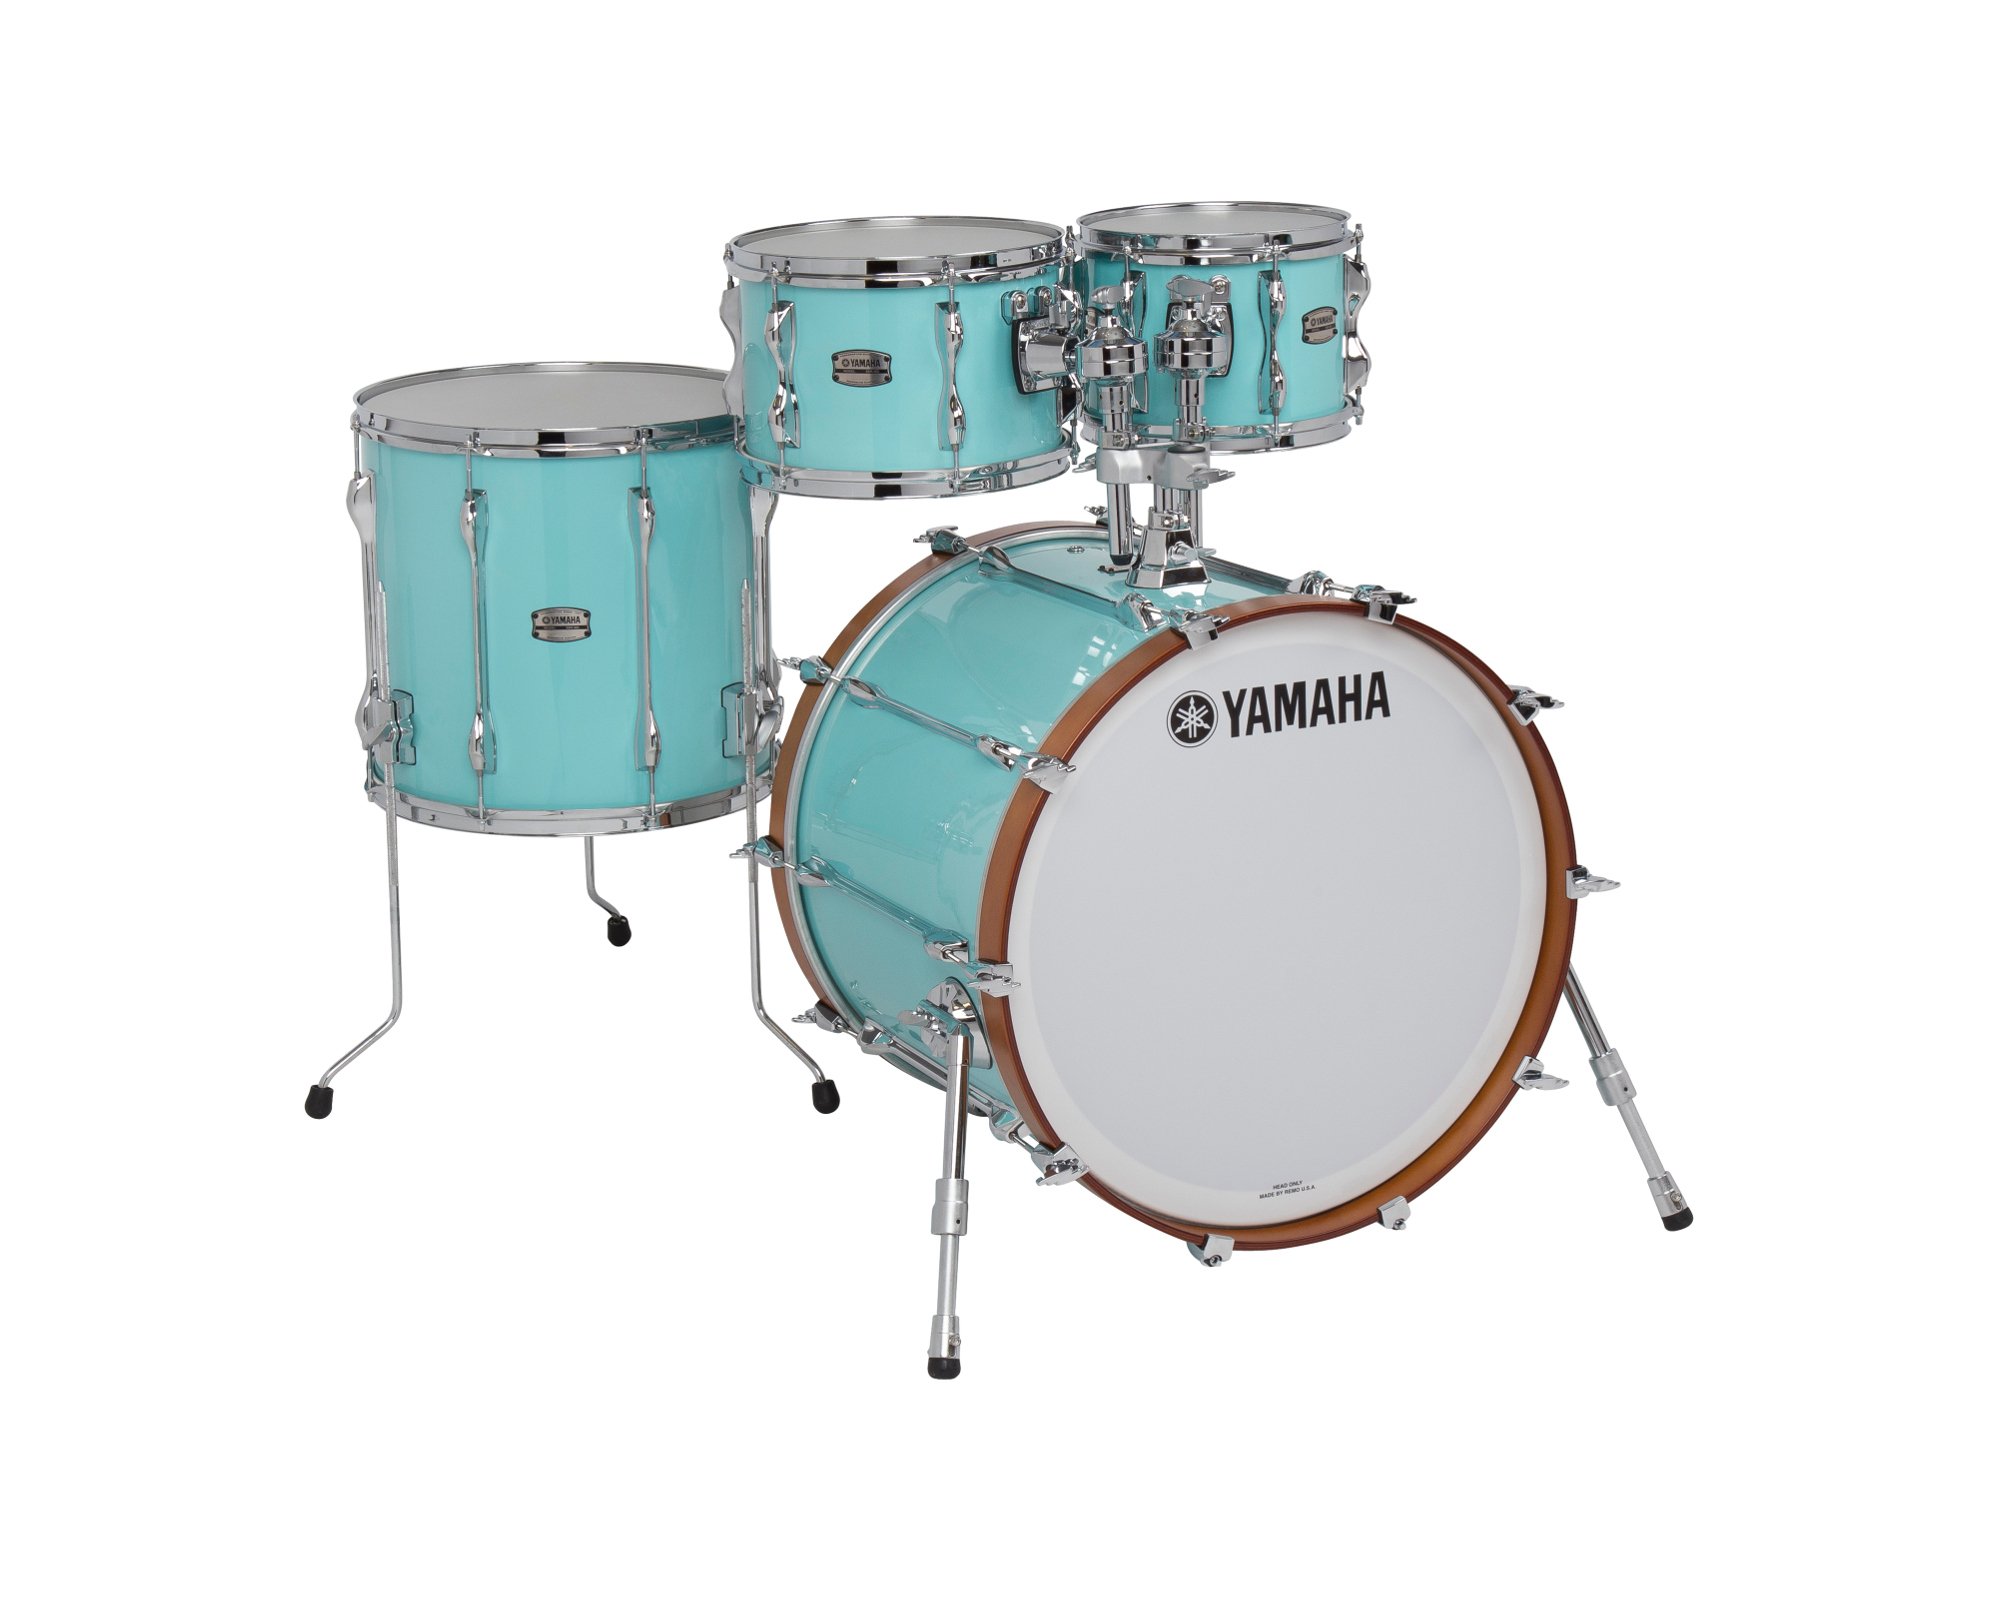 Lezen Geld rubber hoofdonderwijzer Yamaha Recording Custom 4-Piece Shell Pack - Surf Green 10"x7.5" And 12"x8"  Rack Toms, 16"x15" Floor Tom, And 22"x18" Bass Drum | Full Compass Systems